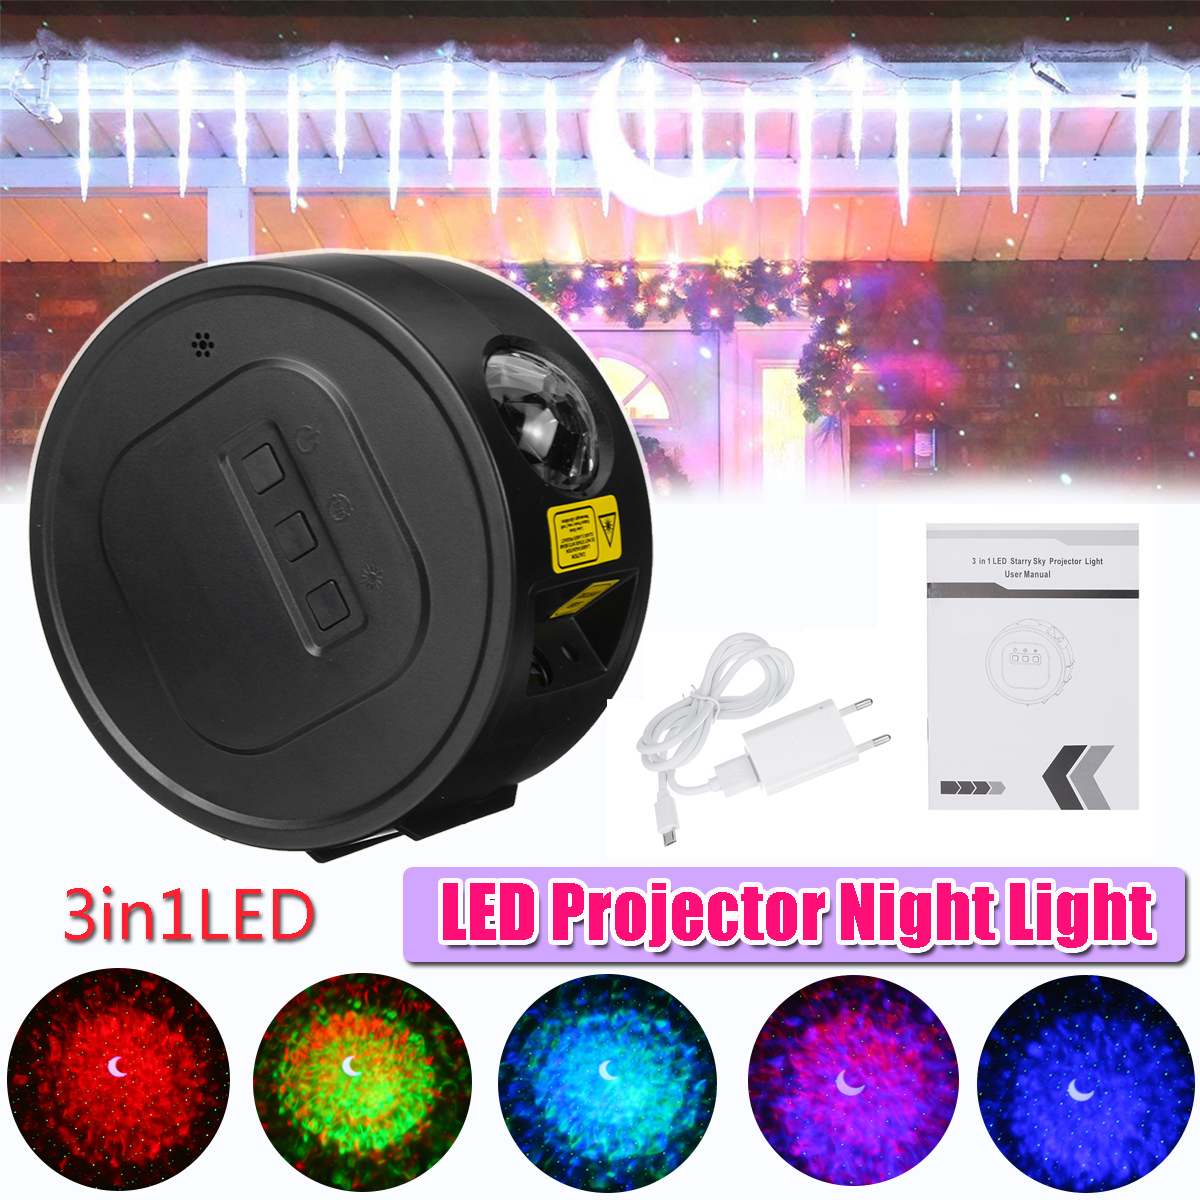 USB-LED-Star-Projector-Night-Light-6-Colors-Ocean-Wave-Galaxy-Projection-Lamp-1749017-1